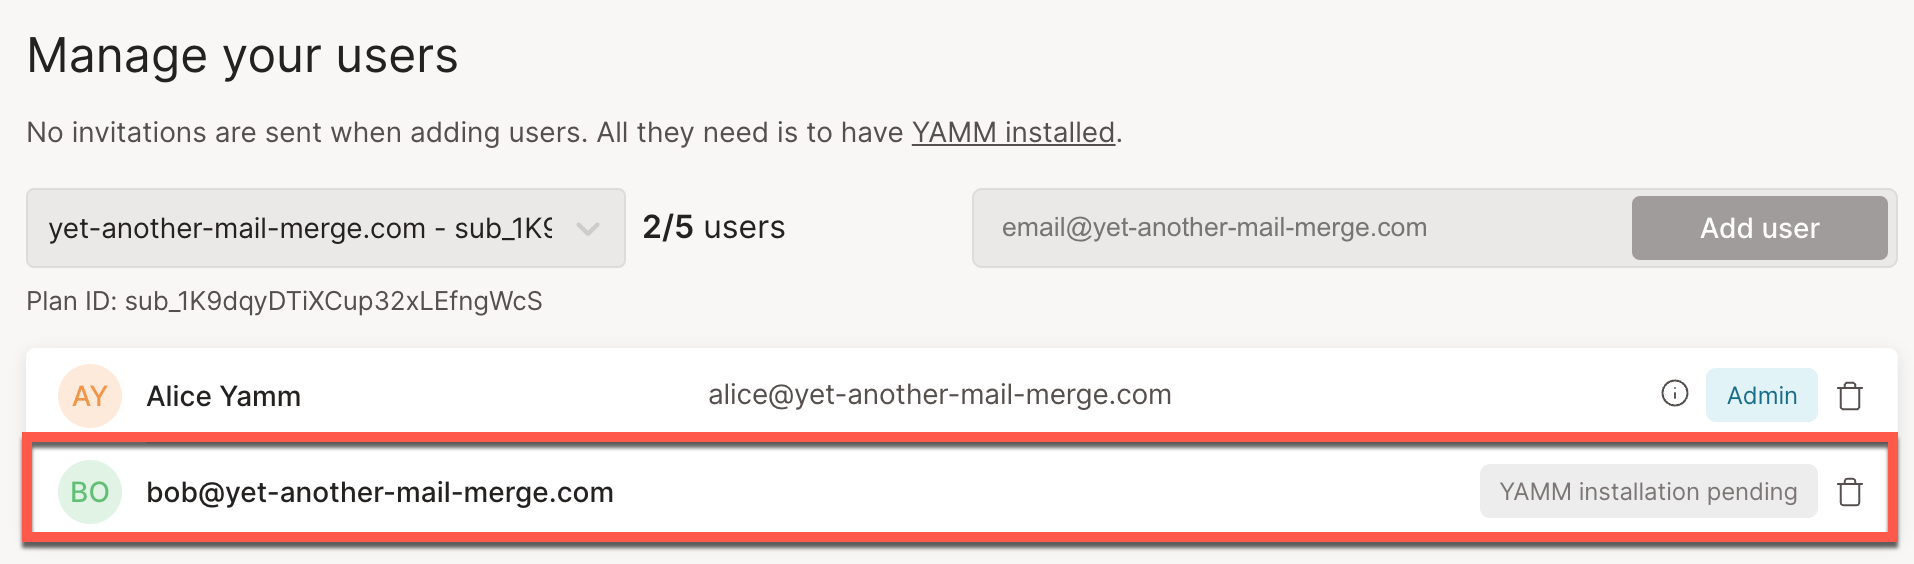 status-user-install-YAMM.png